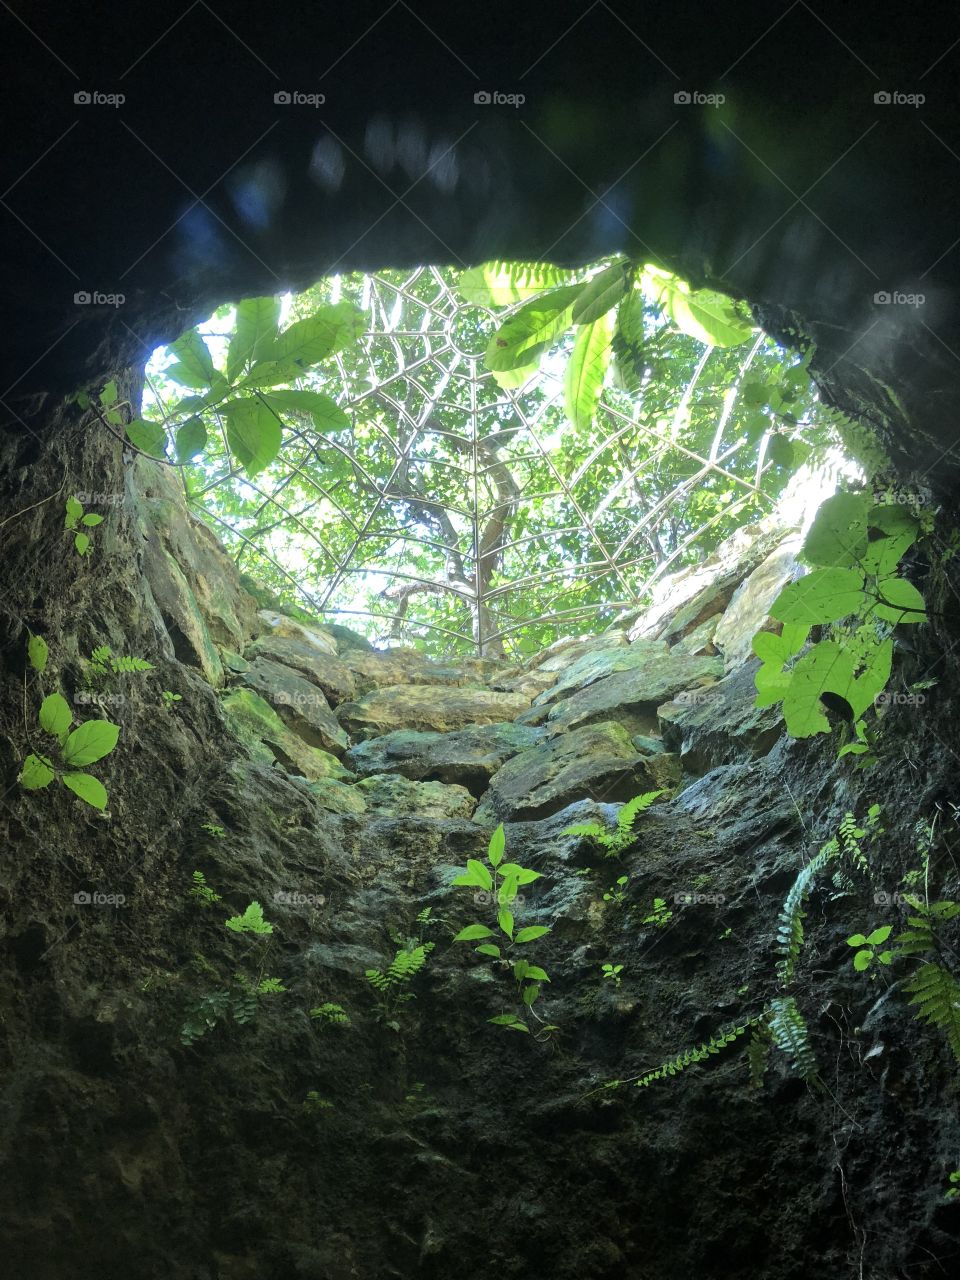 Porthole view from inside a Cenote in Mexico. Light filtered through lush green rain forest canopy.